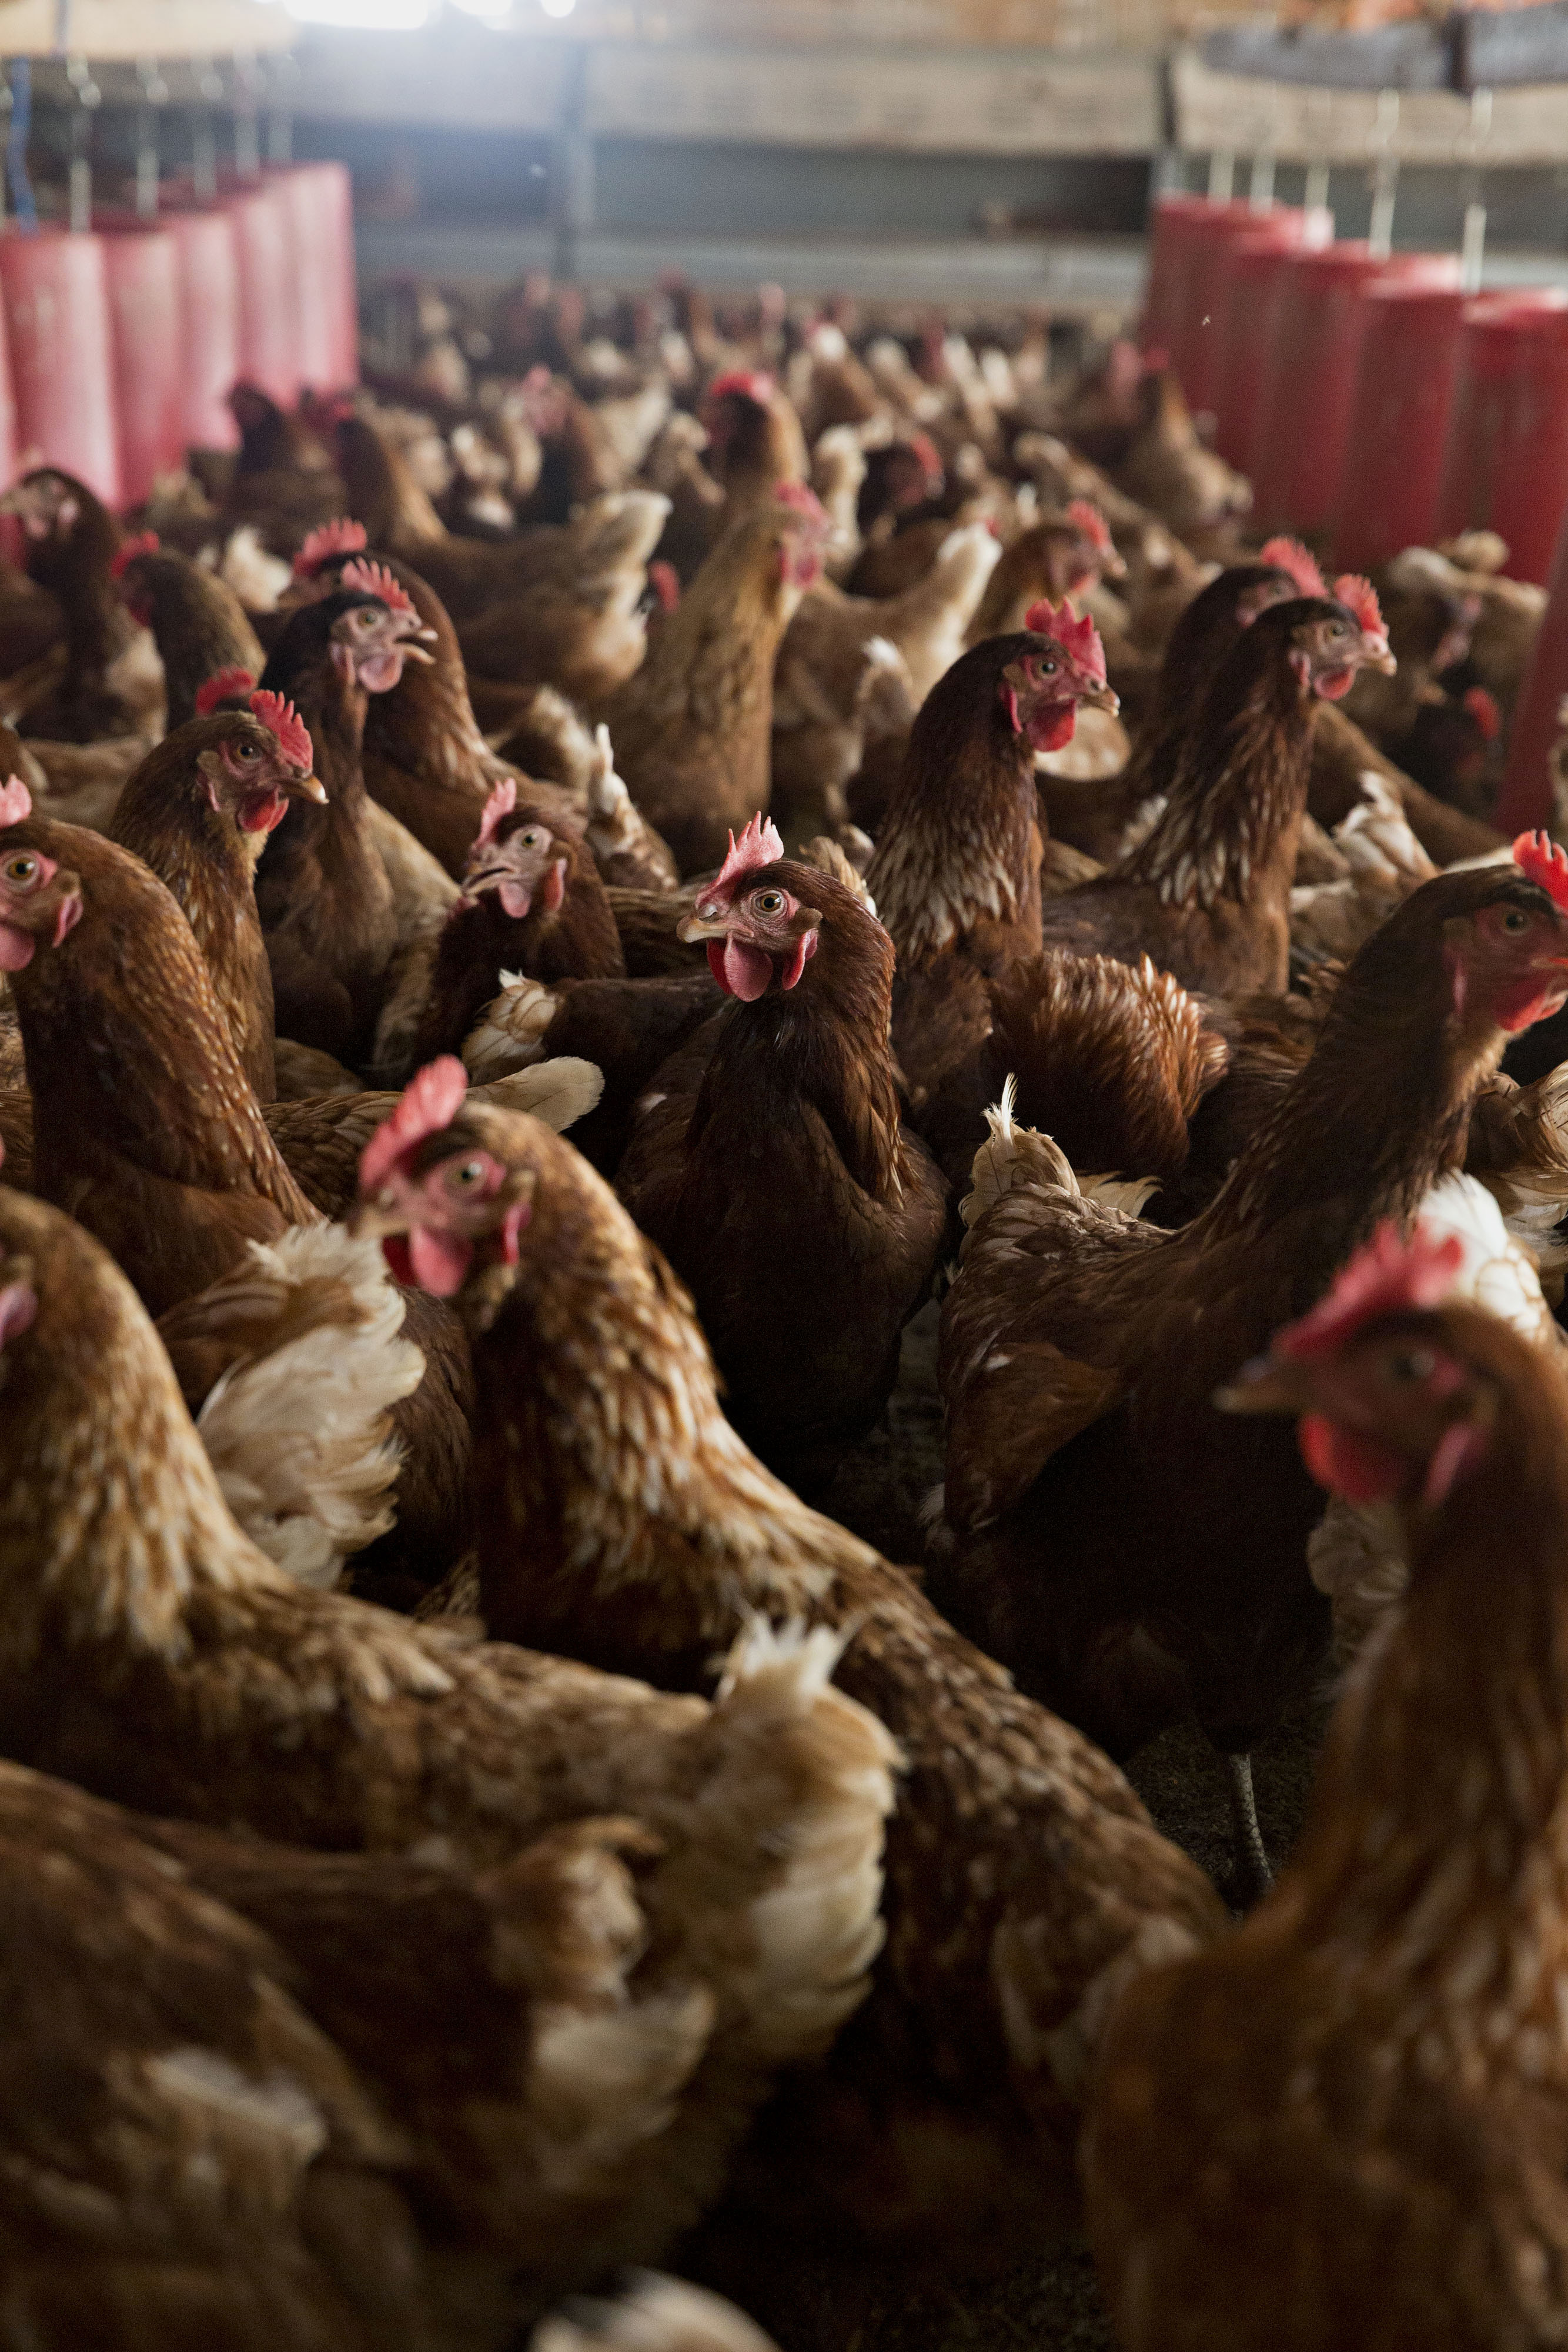 Egg-laying chickens in a crowded barn.